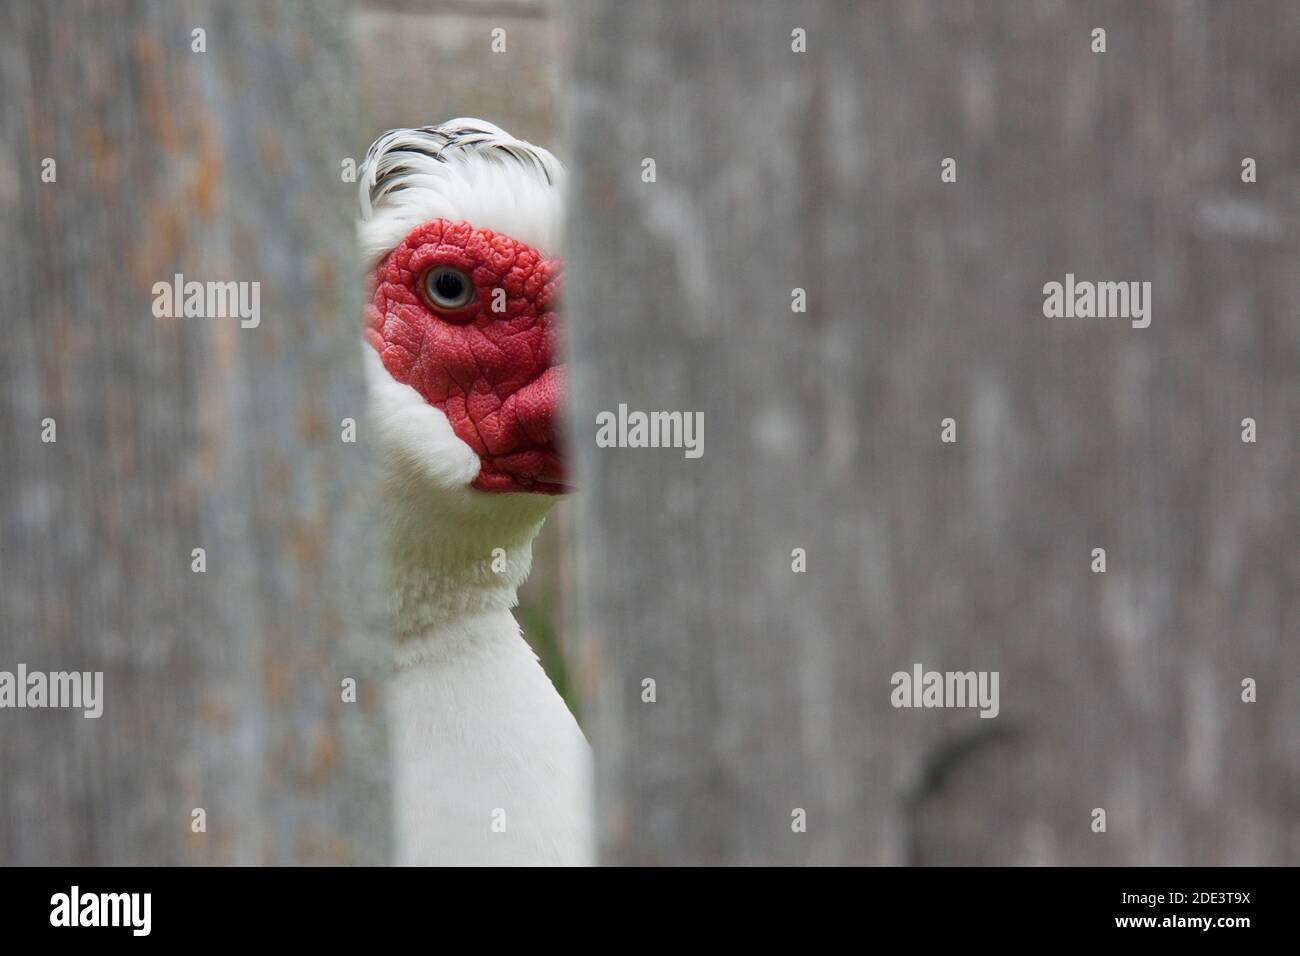 White Muscovy Duck Looking Through Fence, Upper Canada Village, Morrisburg, Ontario, Canada Stock Photo